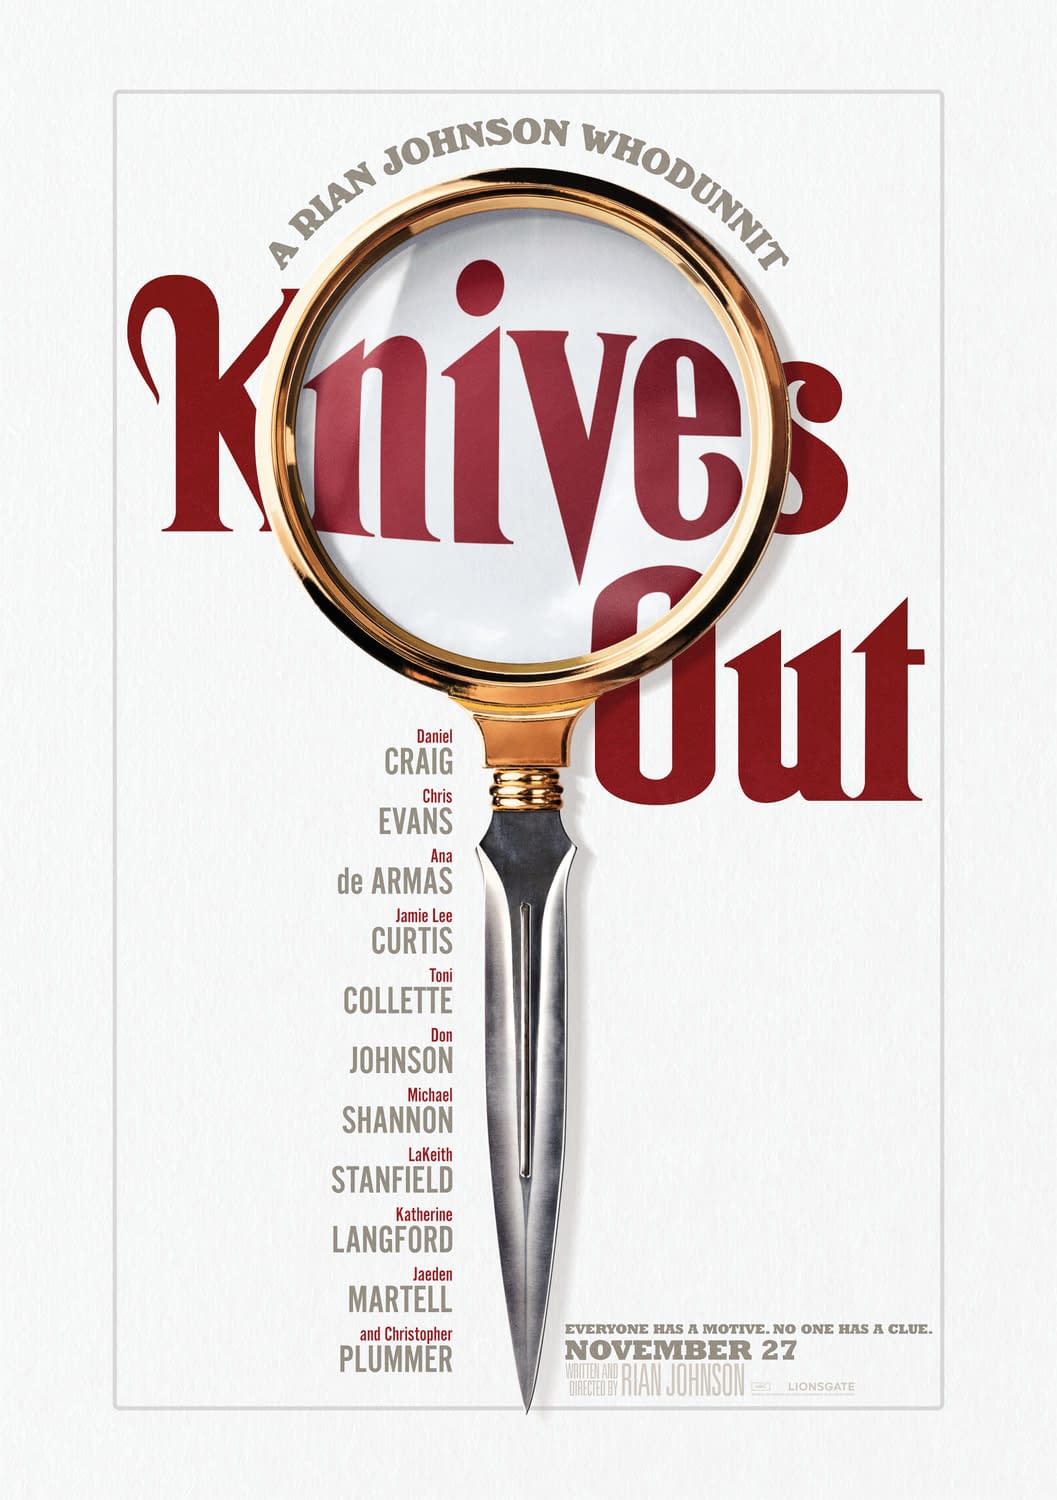 11 New Character Descriptions and Posters for Rian Johnson's "Knives Out"